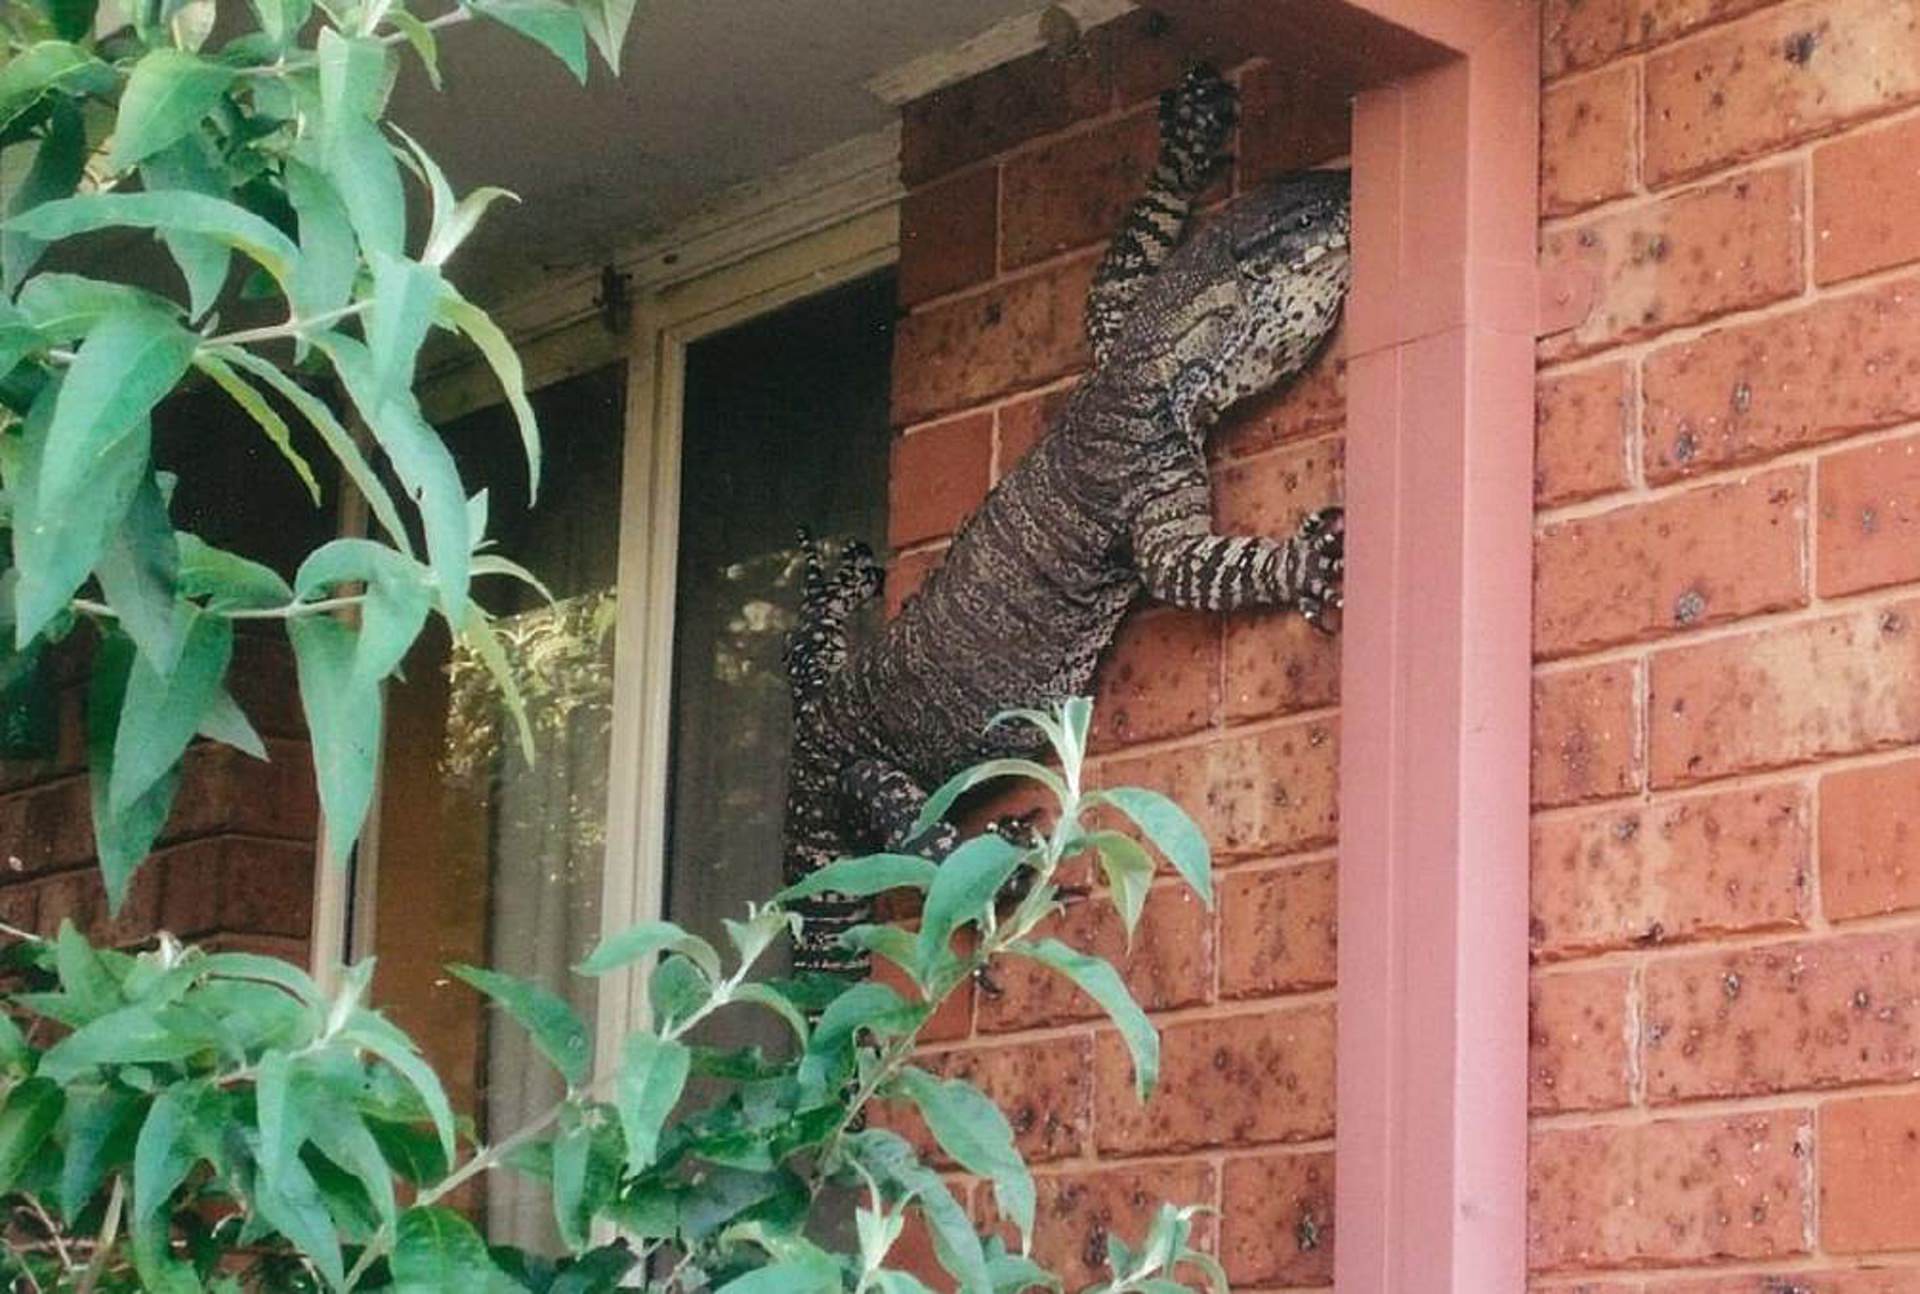 5 Foot Long Giant Monitor Lizard Freaks Away House Owner – No Not Photoshopped